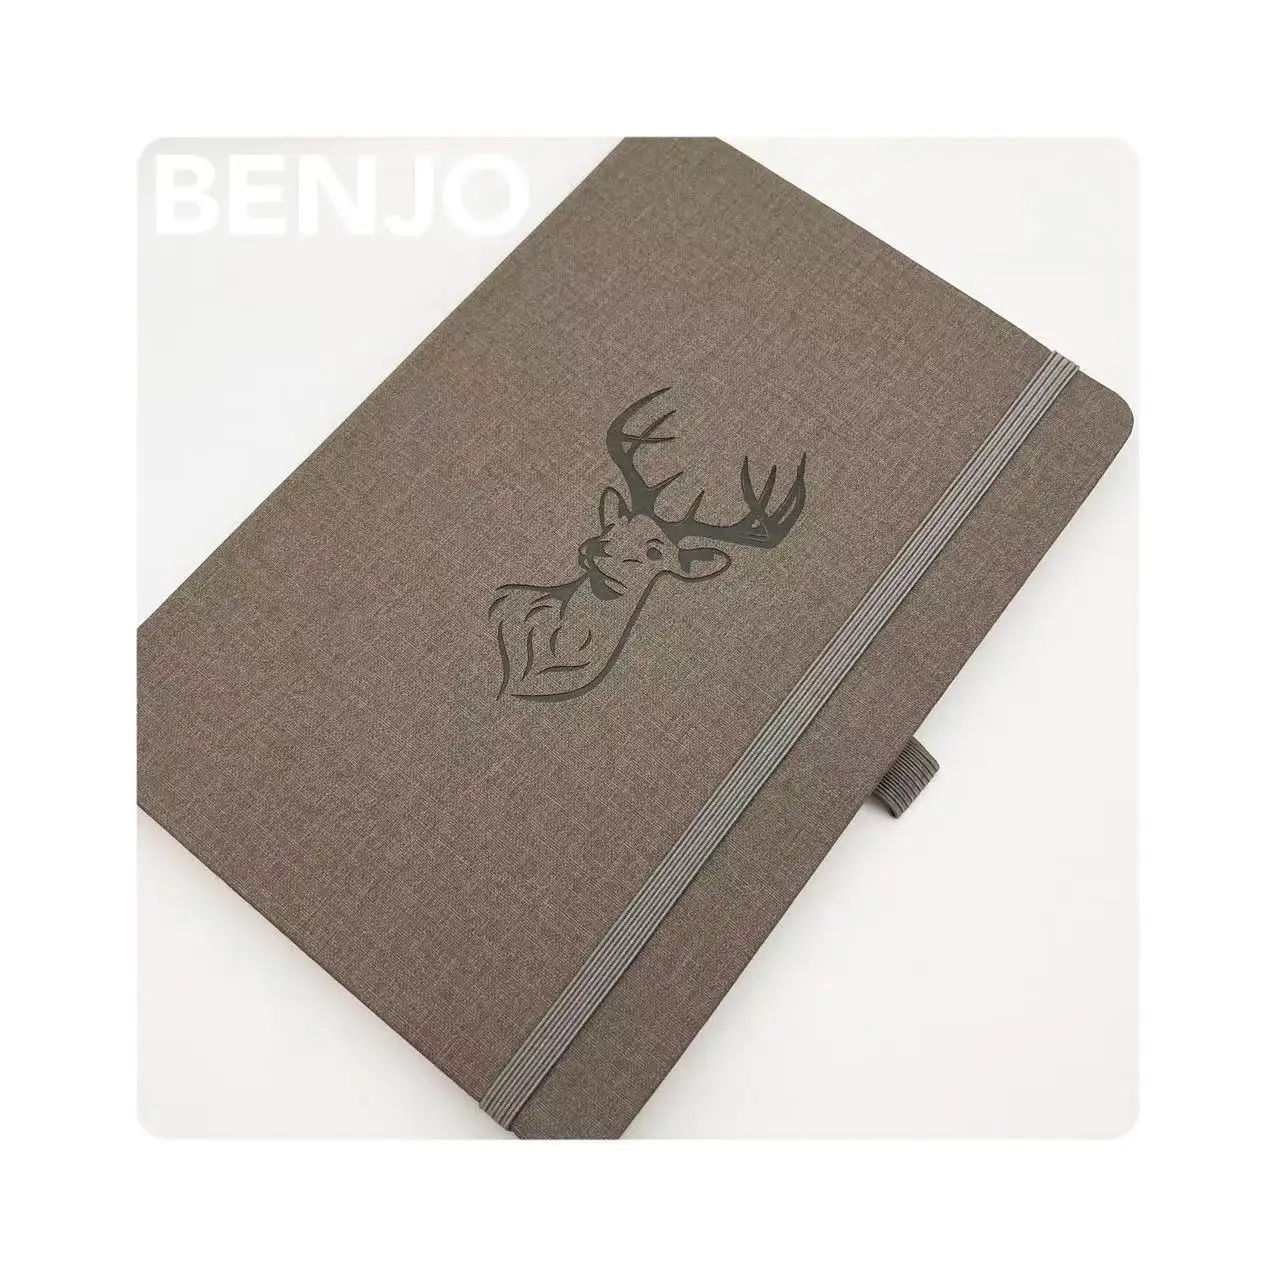 high quality personalized printed logo leather notebooks custom a5 dotted pu cover note book with pen loop for engraving